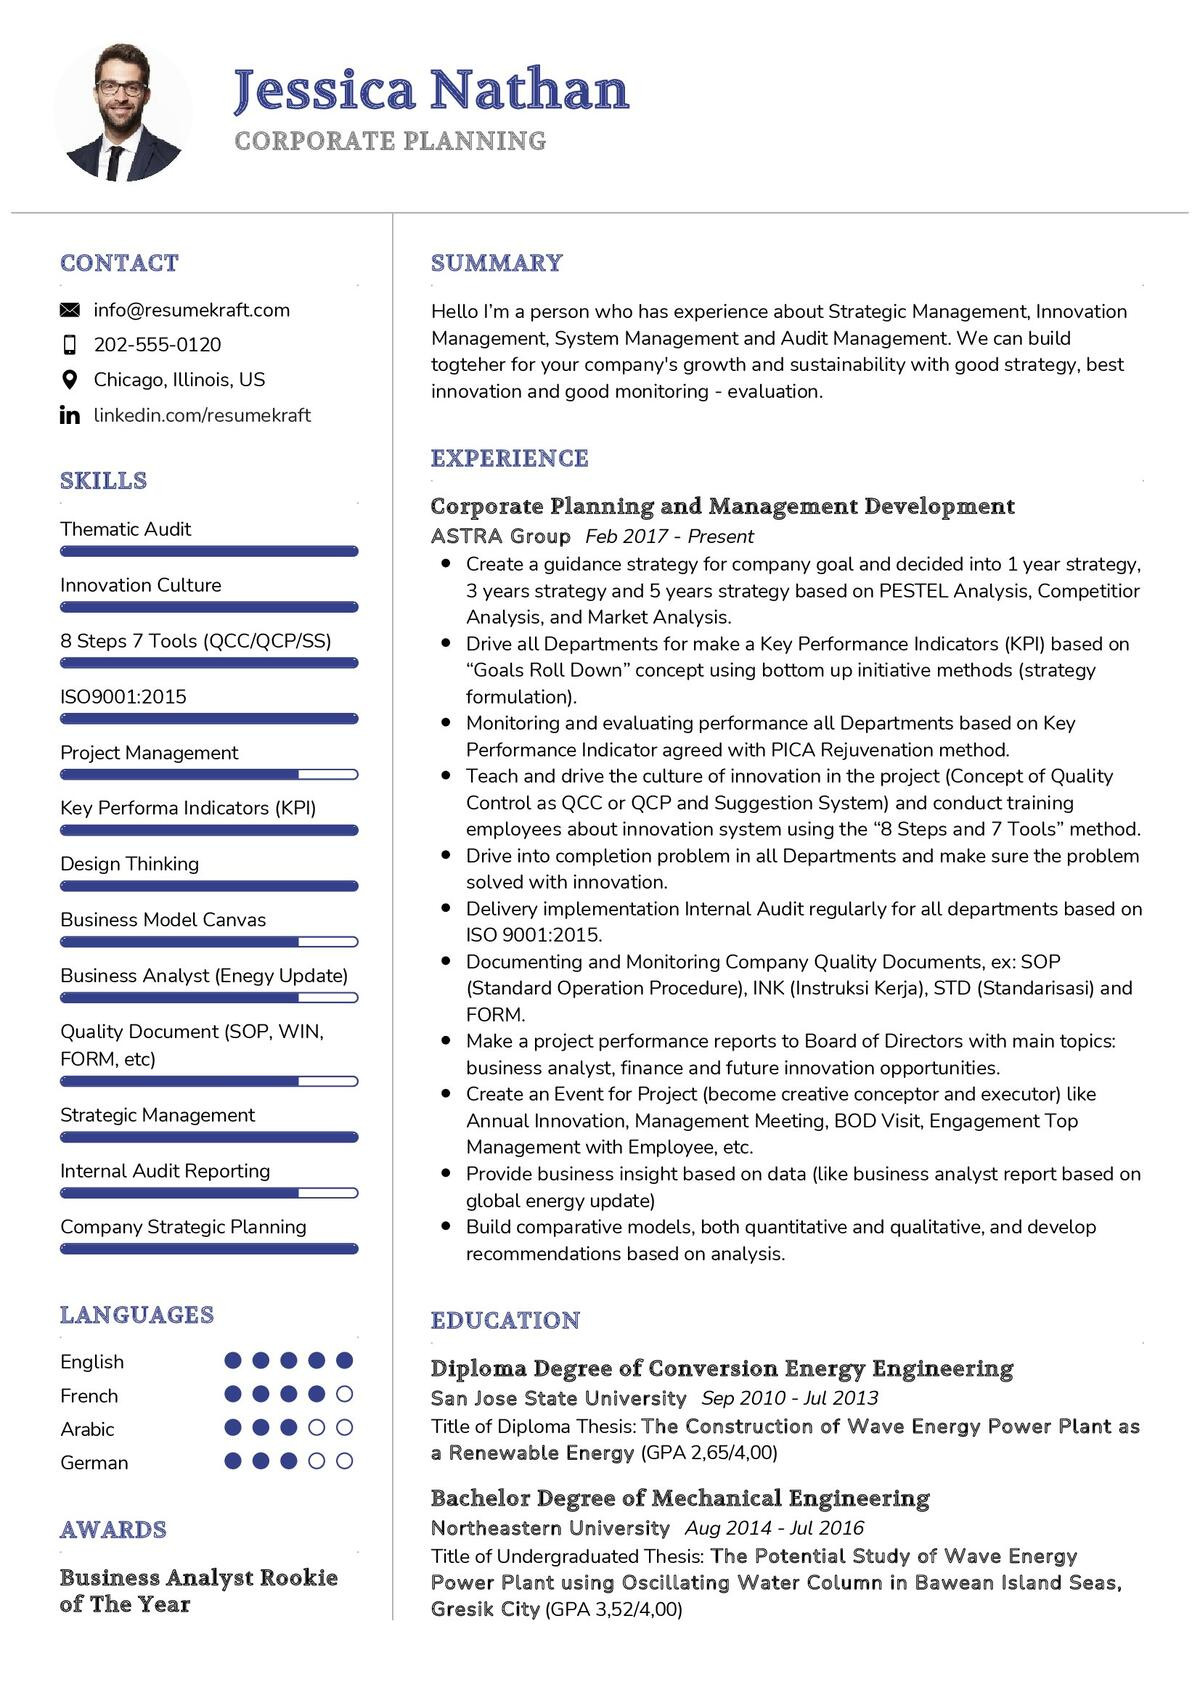 Sample Skills to Put On A Resume for Strategic Planner Corporate Planning Cv Example 2022 Writing Tips – Resumekraft